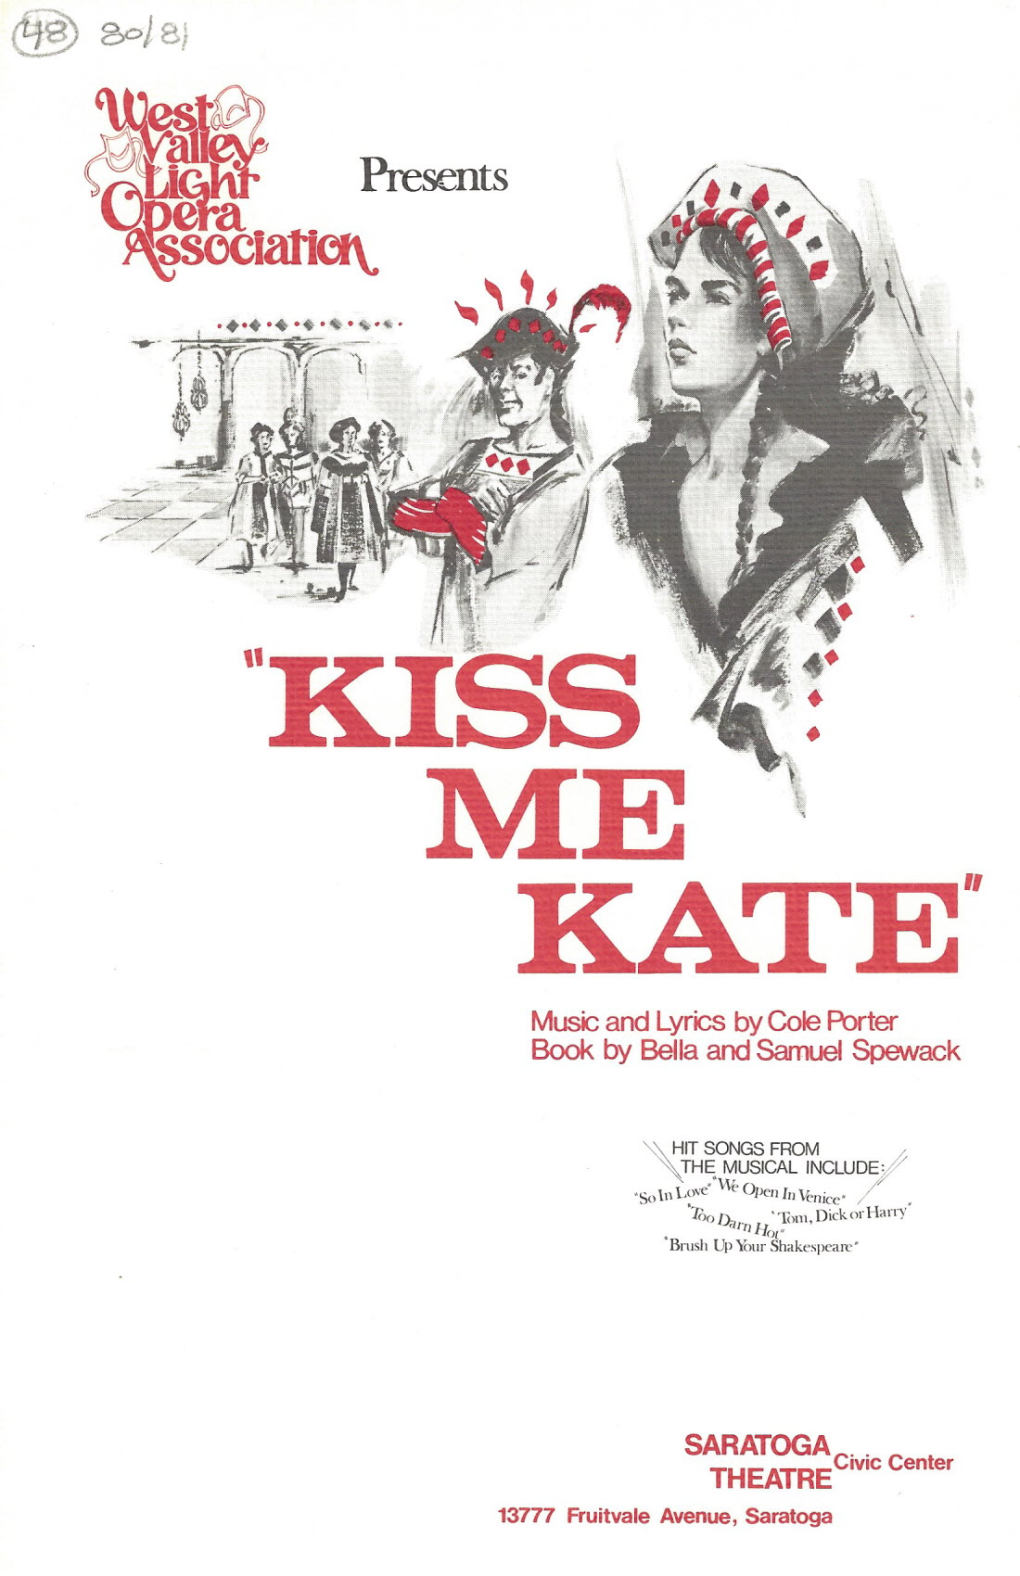 "KISS ME' KATE" Music and Lyrics by Cole Porter Book by Bella and Samuel Spewack